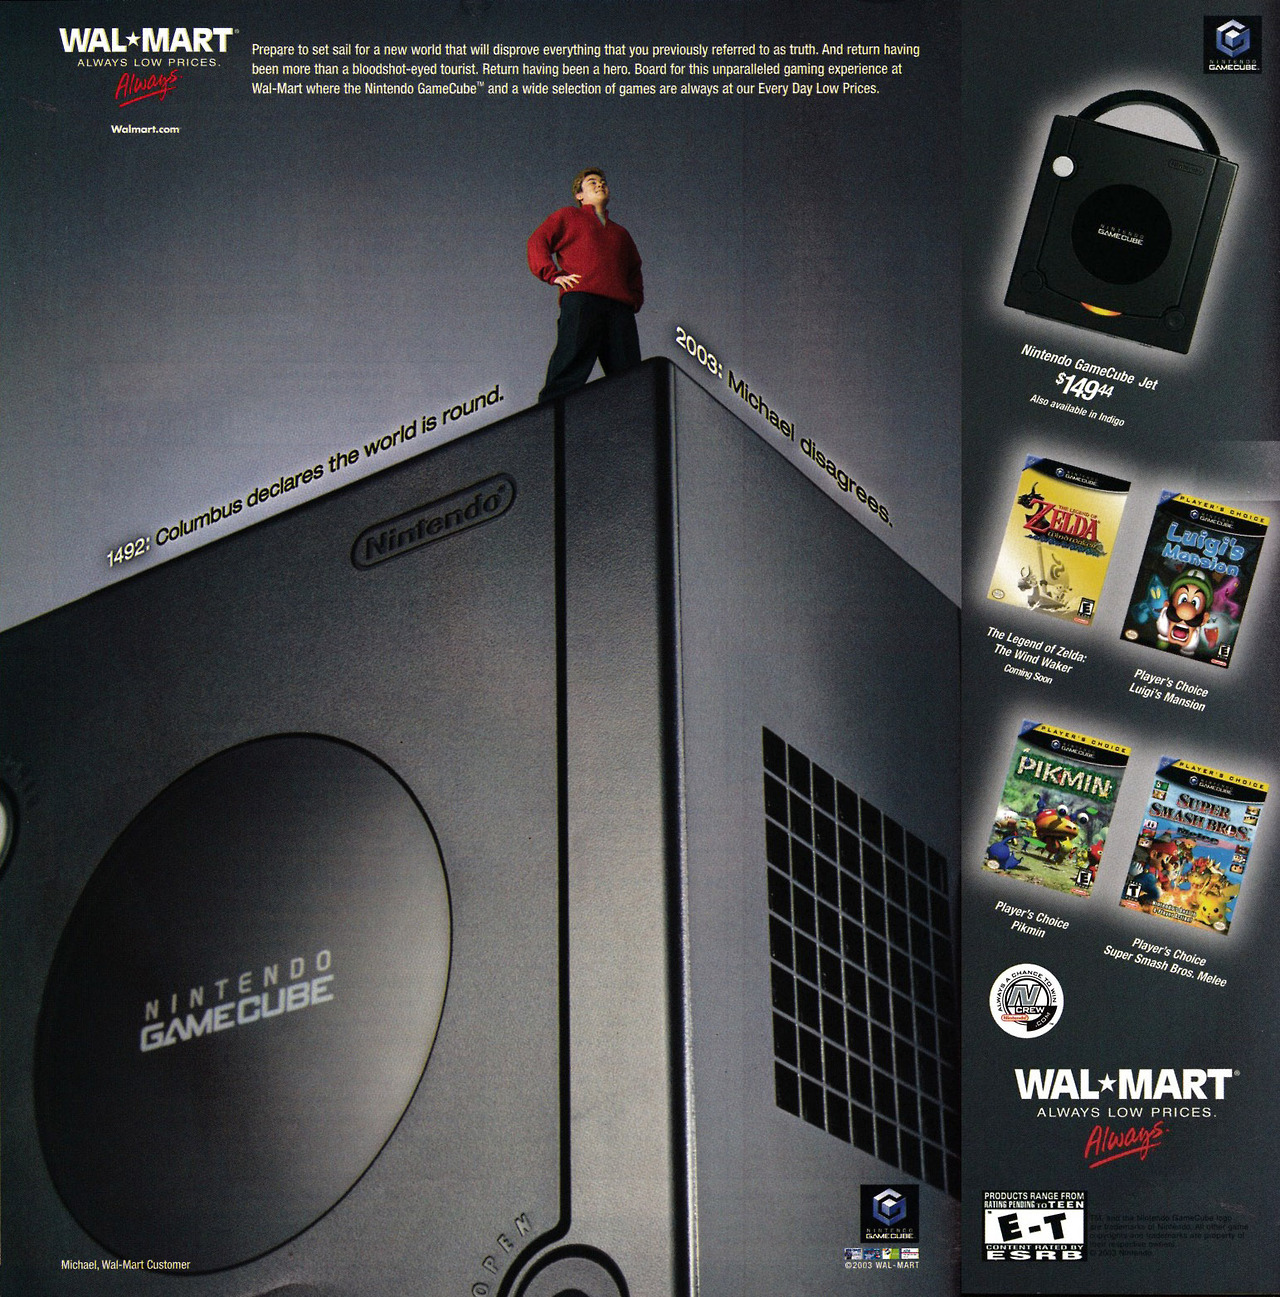 “Walmart - ‘Micheal’”
GamePro, April 2003 (#175)
2004: Micheal makes the controversial claim that the sky is, in fact, a purple triangle.
2005: Micheal eats his Nintendo Gamecube to prove that Rosa Parks was a racist.
2006: Micheal drops out of...